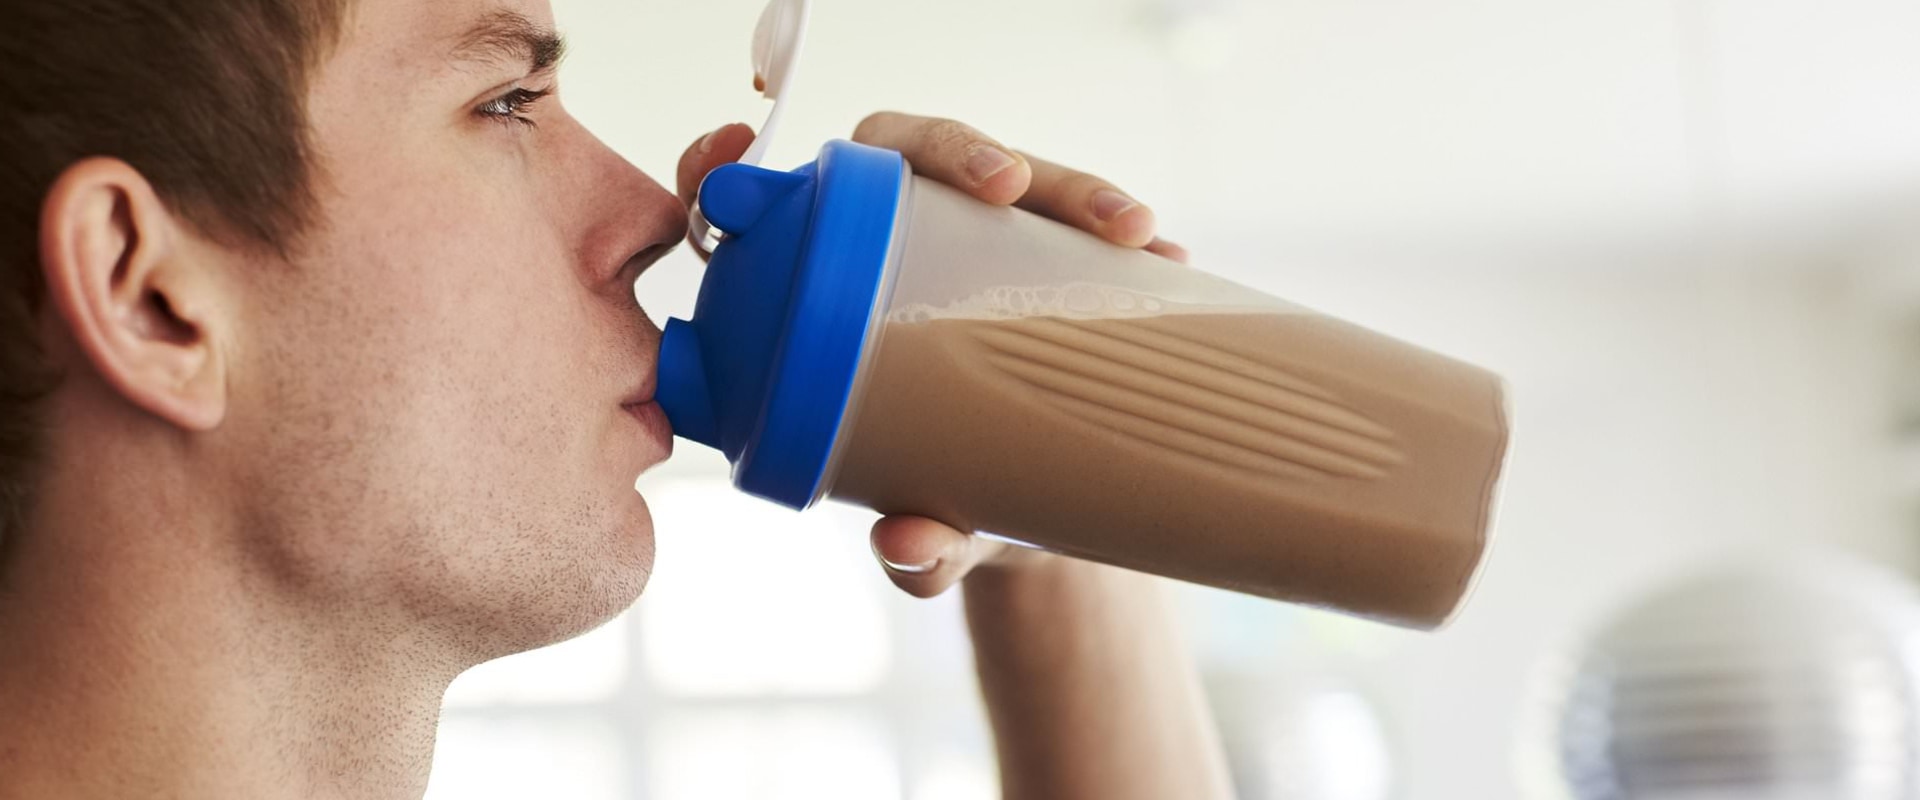 Is protein powder good for depression?